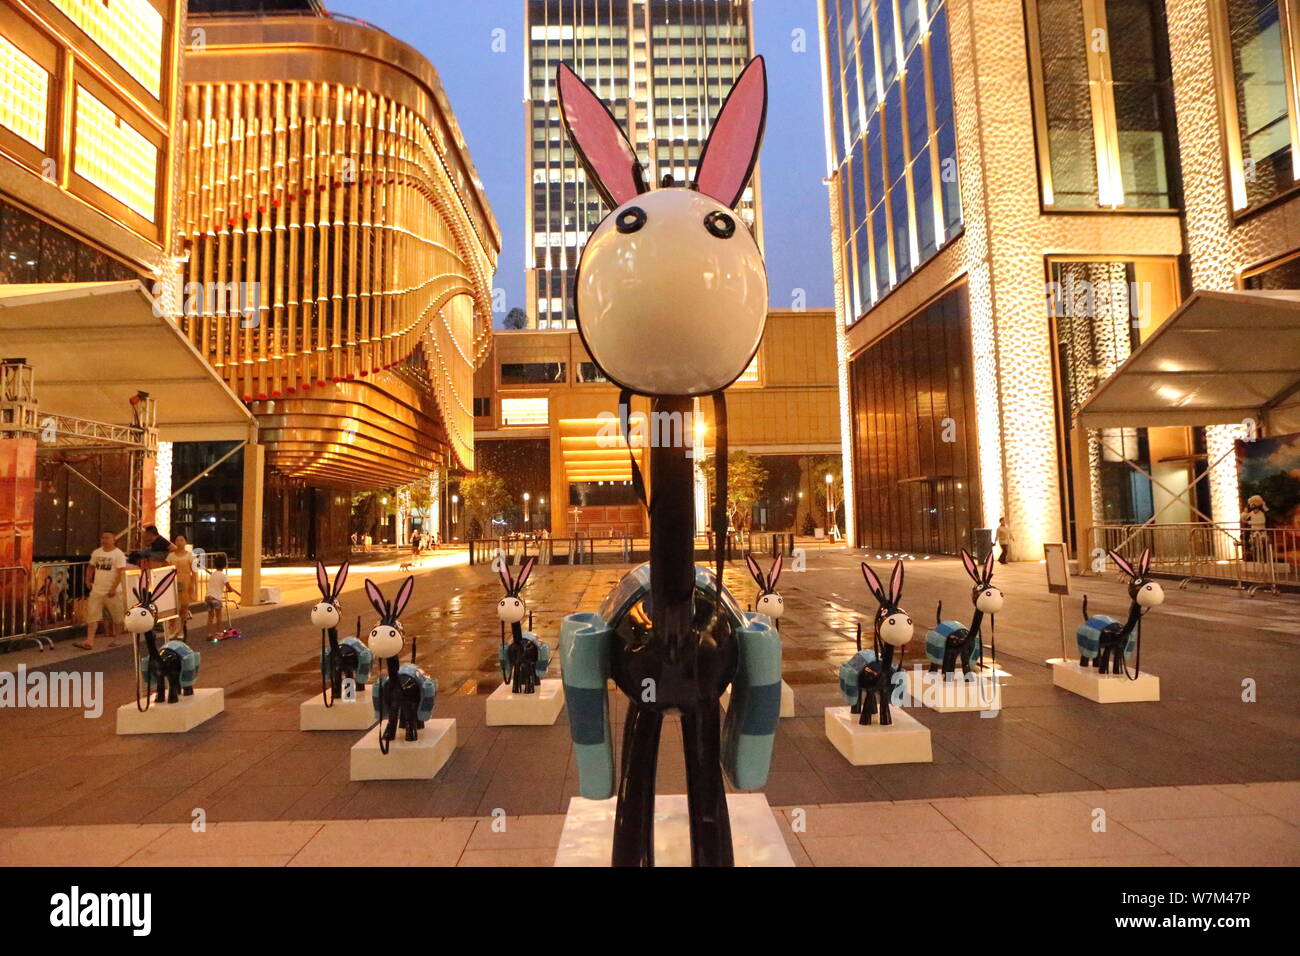 A 3.5-meter high giant donkey and small donkeys are on display during the largest Avanti-themed exhibition at the Bund Finance Centre (BFC) in Shangha Stock Photo